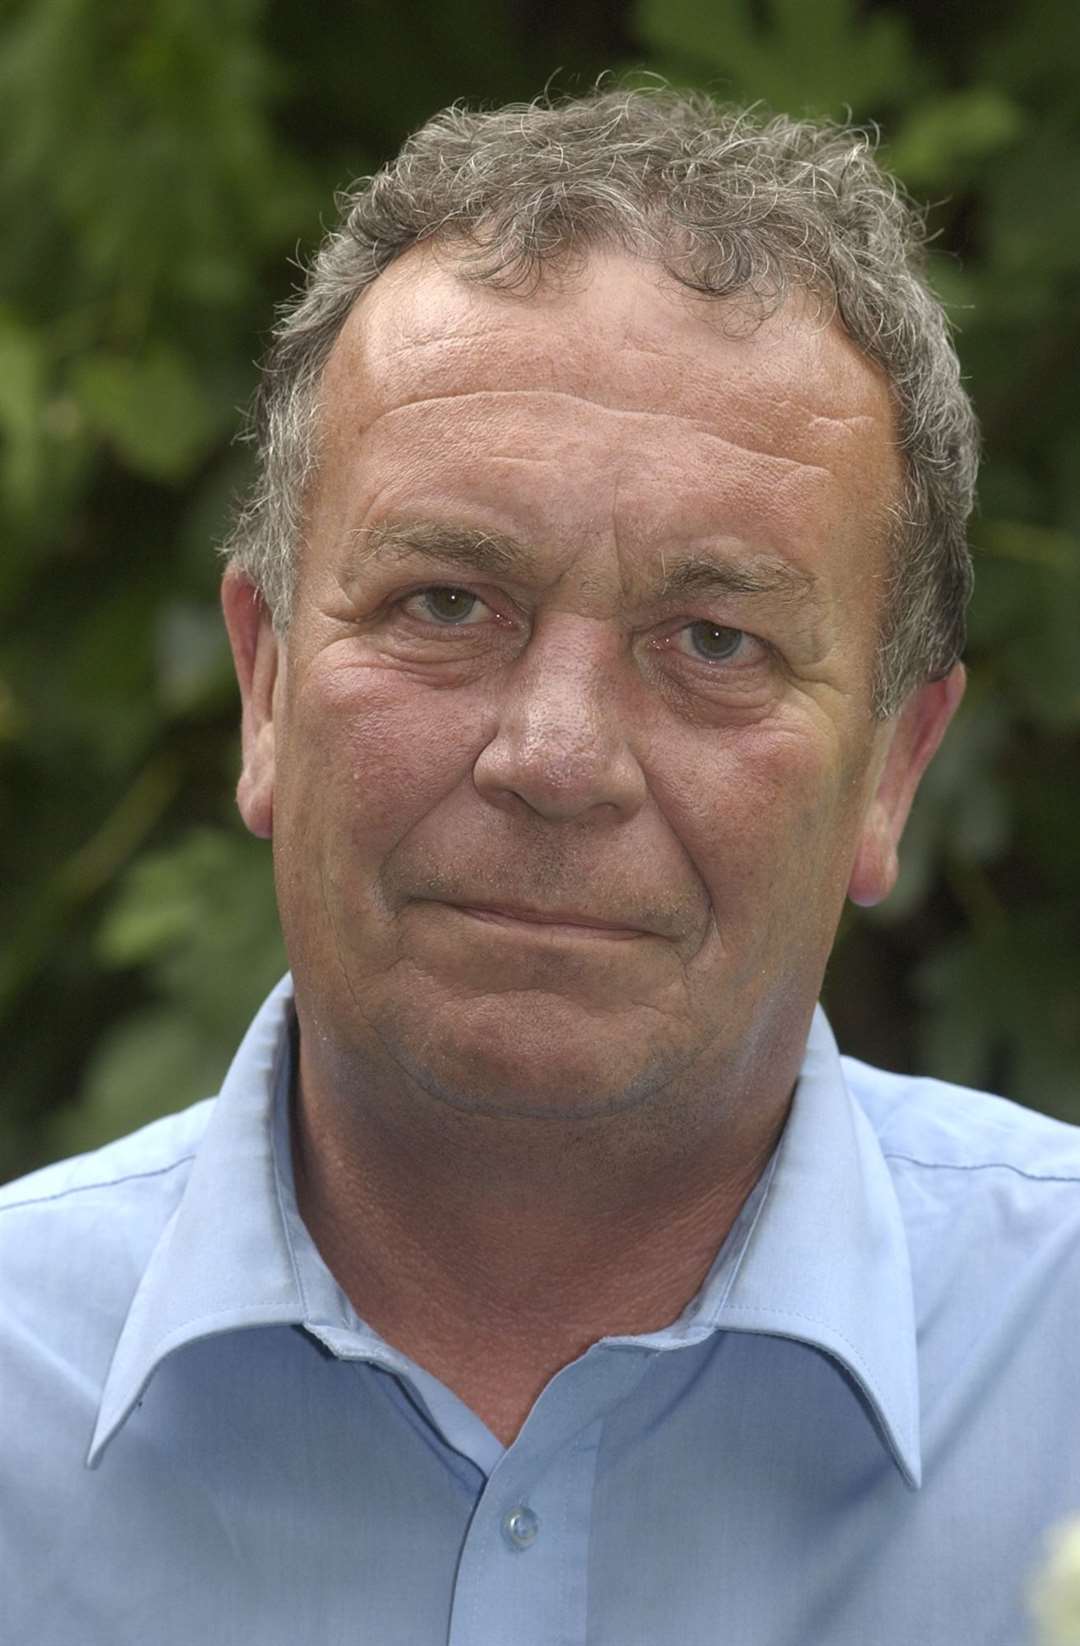 Former BBC sports presenter Kevin Gearey, pictured in 2006